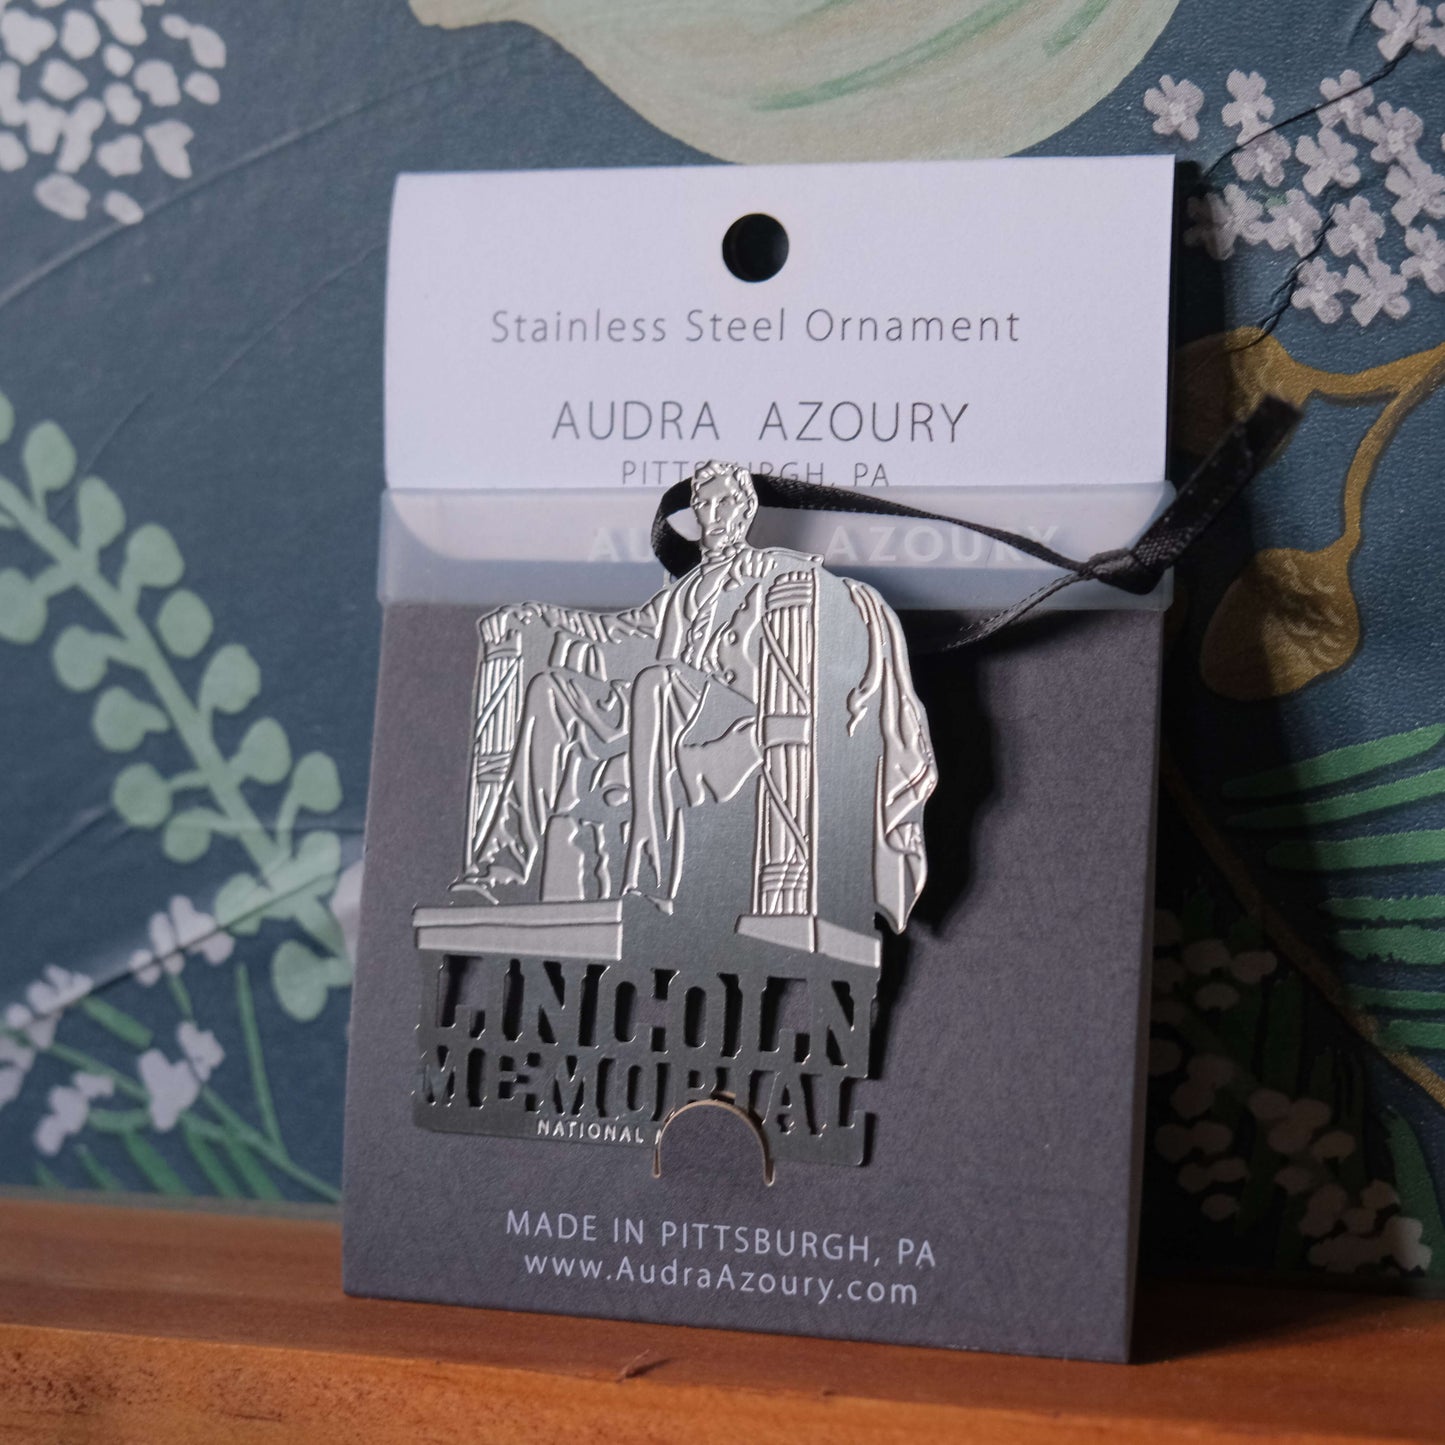 Lincoln Memorial Stainless Steel Ornament by Audra Azoury